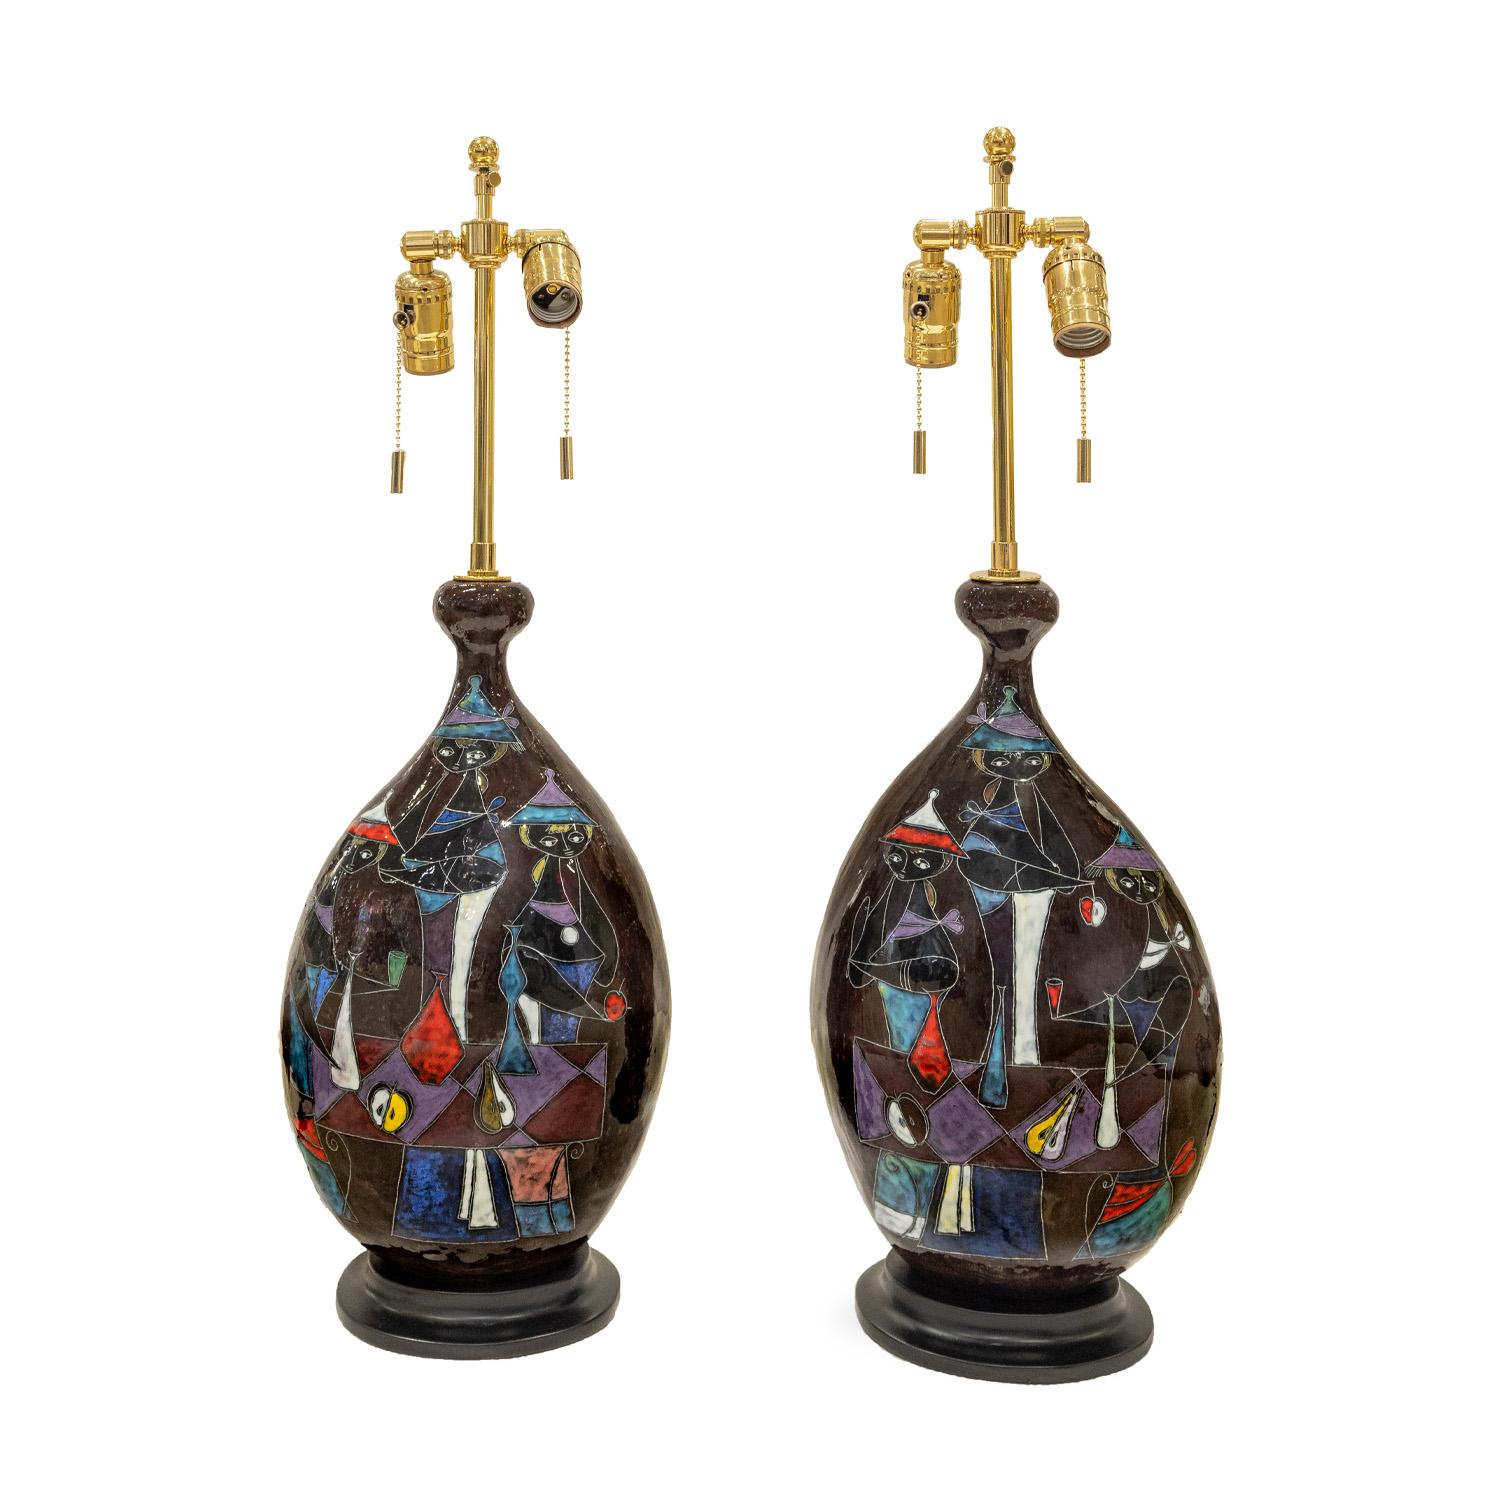 Mid-Century Modern Marcello Fantoni Pair of Ceramic Table Lamps with Figural Motif 1950s (Signed) For Sale